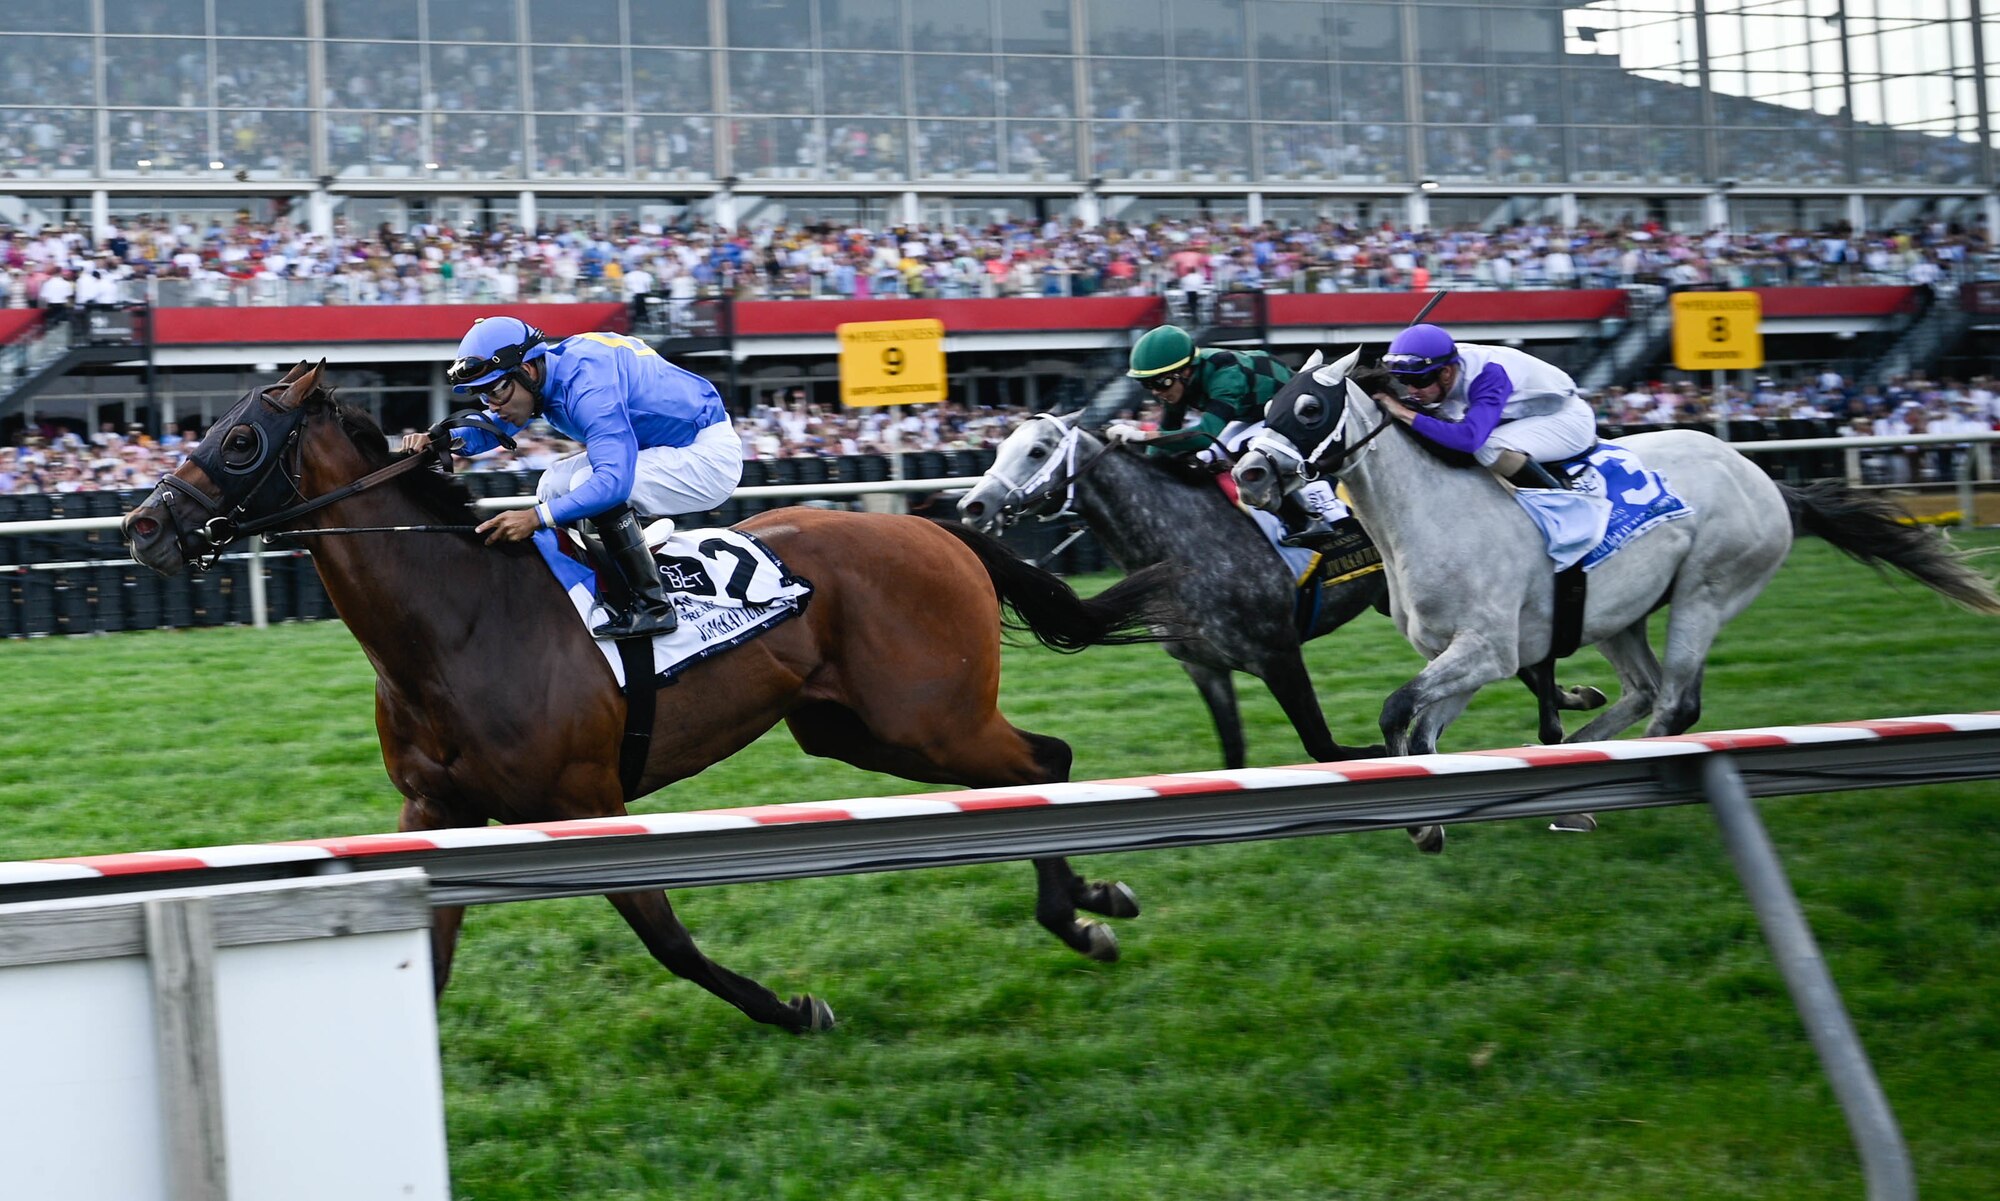 Carotari, a thoroughbred race horse, wins the Jim McKay Turf Sprint during The Preakness at the Pimlico race course, Baltimore, Maryland, May 21, 2022. The Preakness Stakes is an American thoroughbred horse race held on the third Saturday in May each year in Baltimore, Maryland.